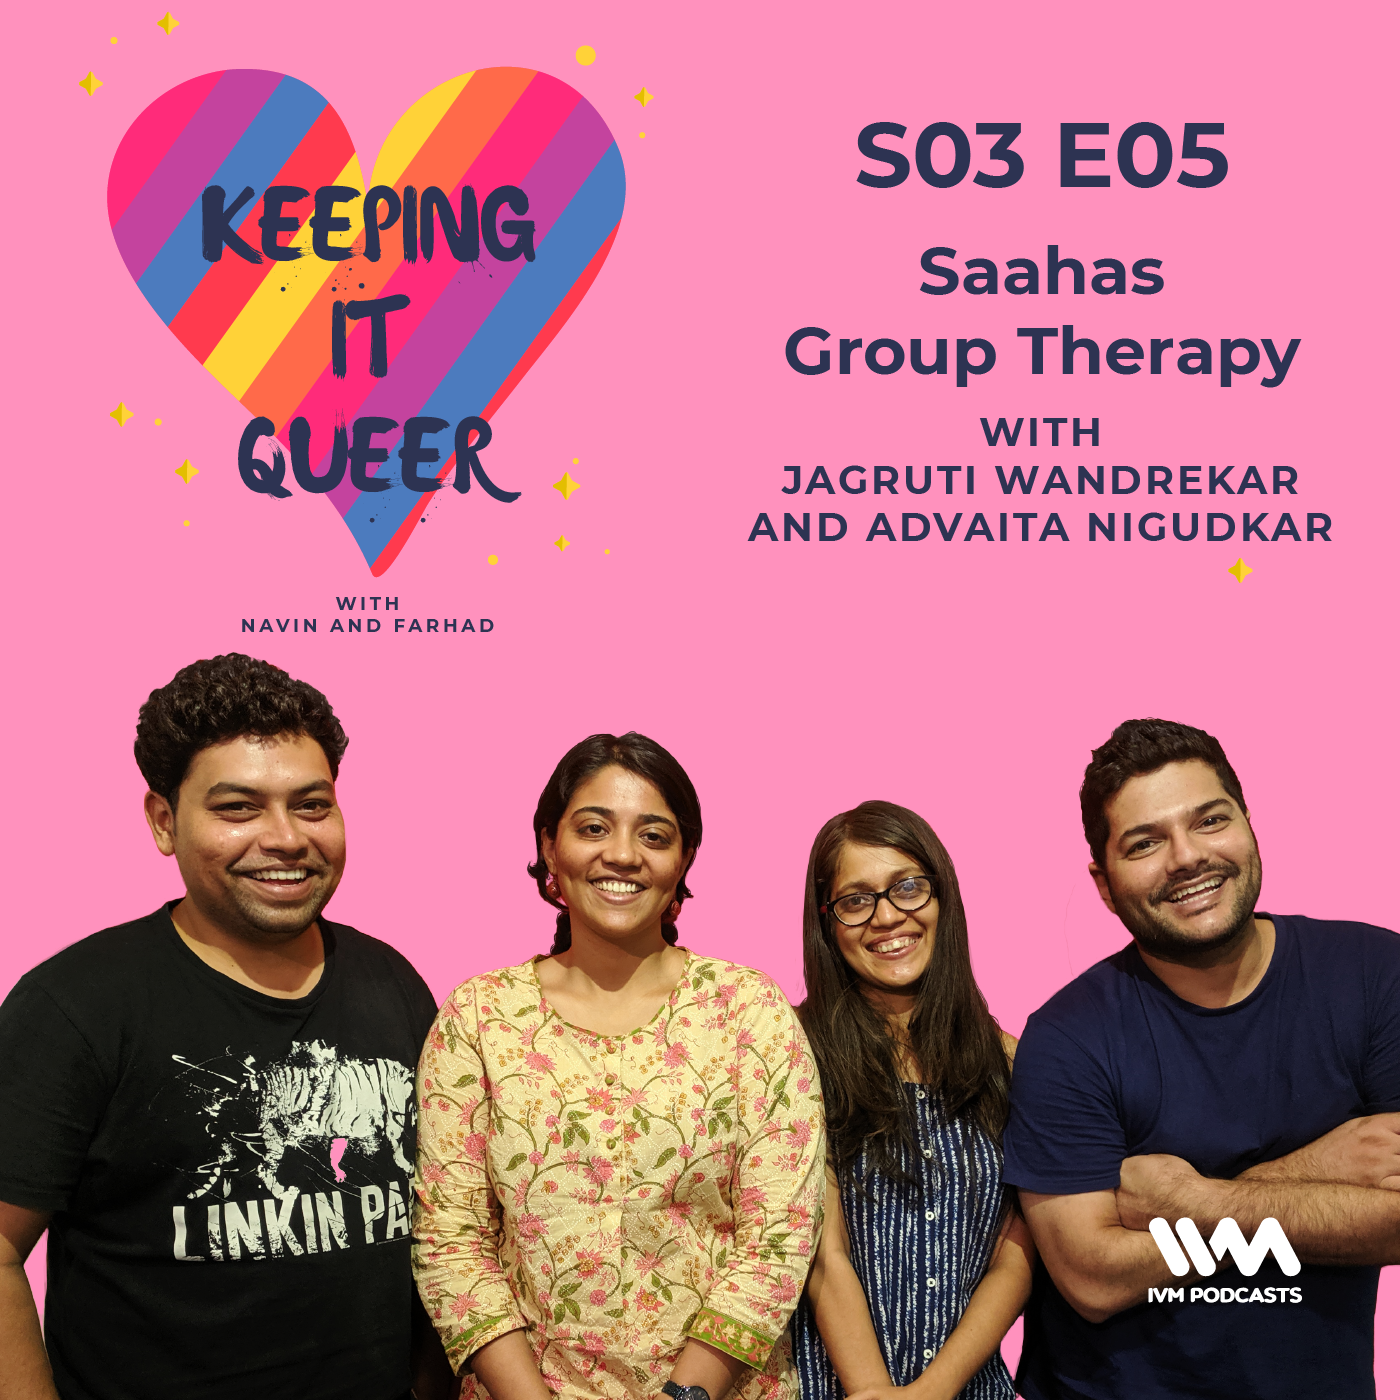 S03 E05: Saahas Group Therapy